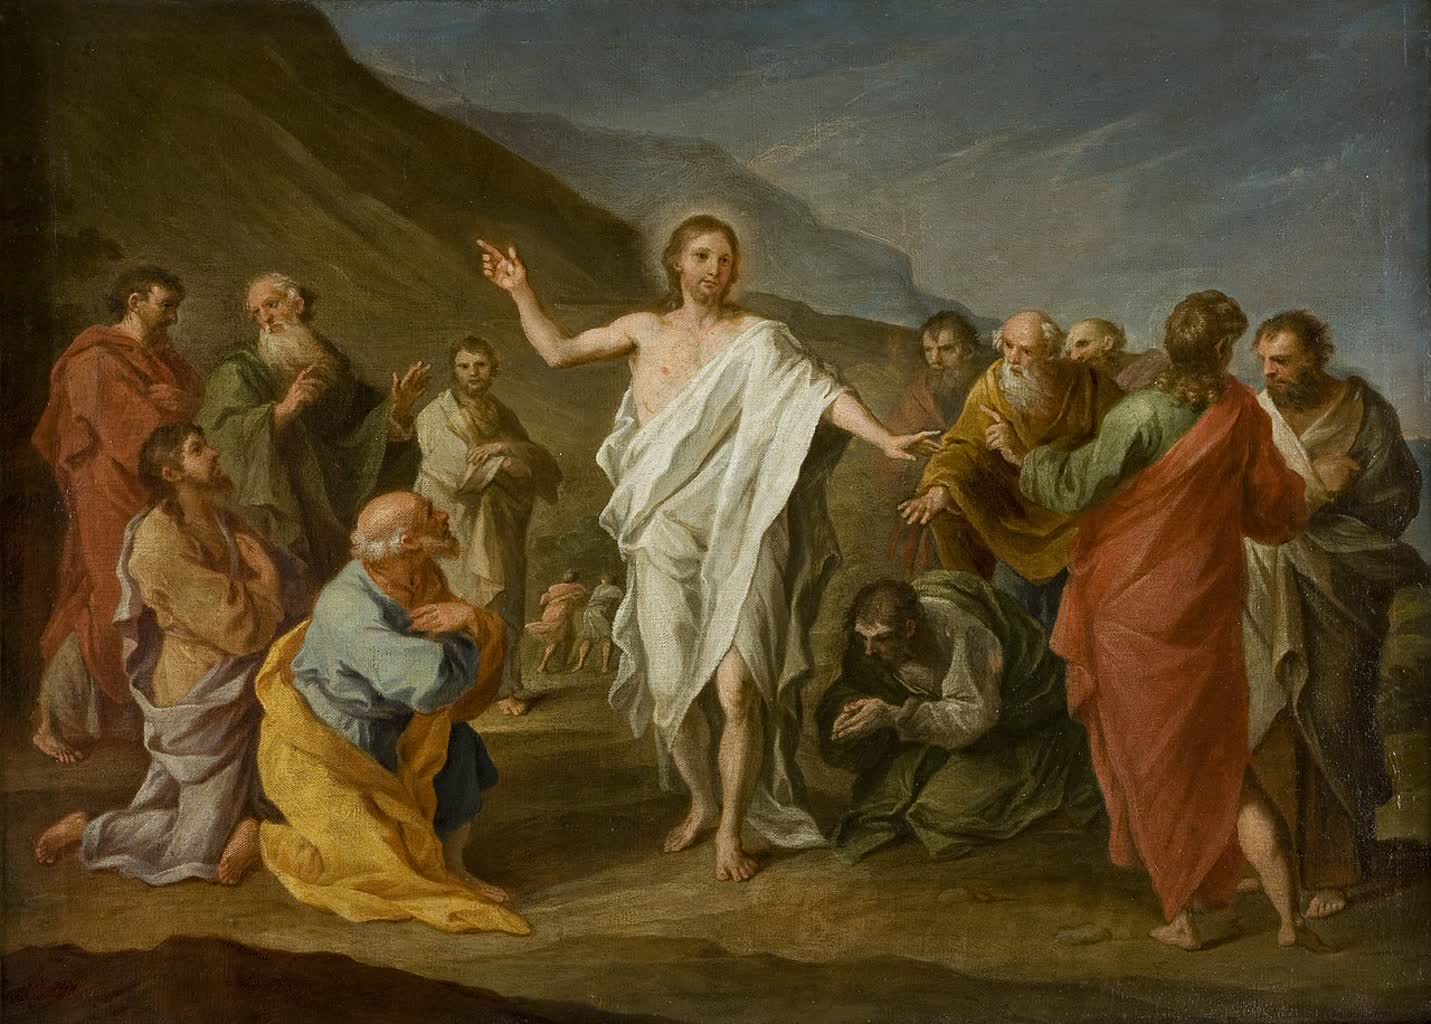 Szymon_Czechowicz_-_Christ_Appearing_to_the_Apostles_after_the_Resurrection_-_MNK_II-a-13_-_National_Museum_Kraków.jpg